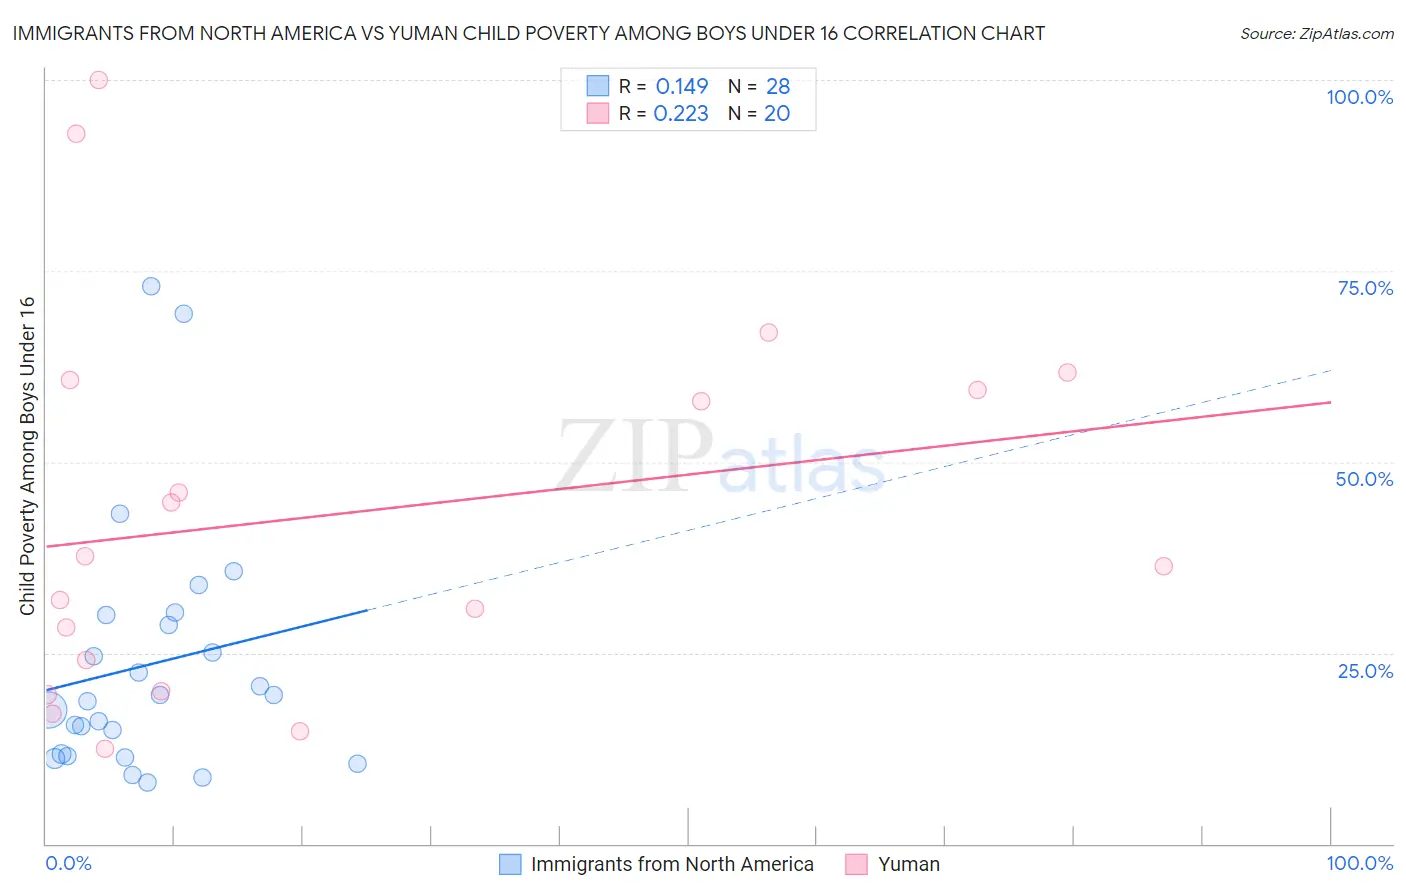 Immigrants from North America vs Yuman Child Poverty Among Boys Under 16